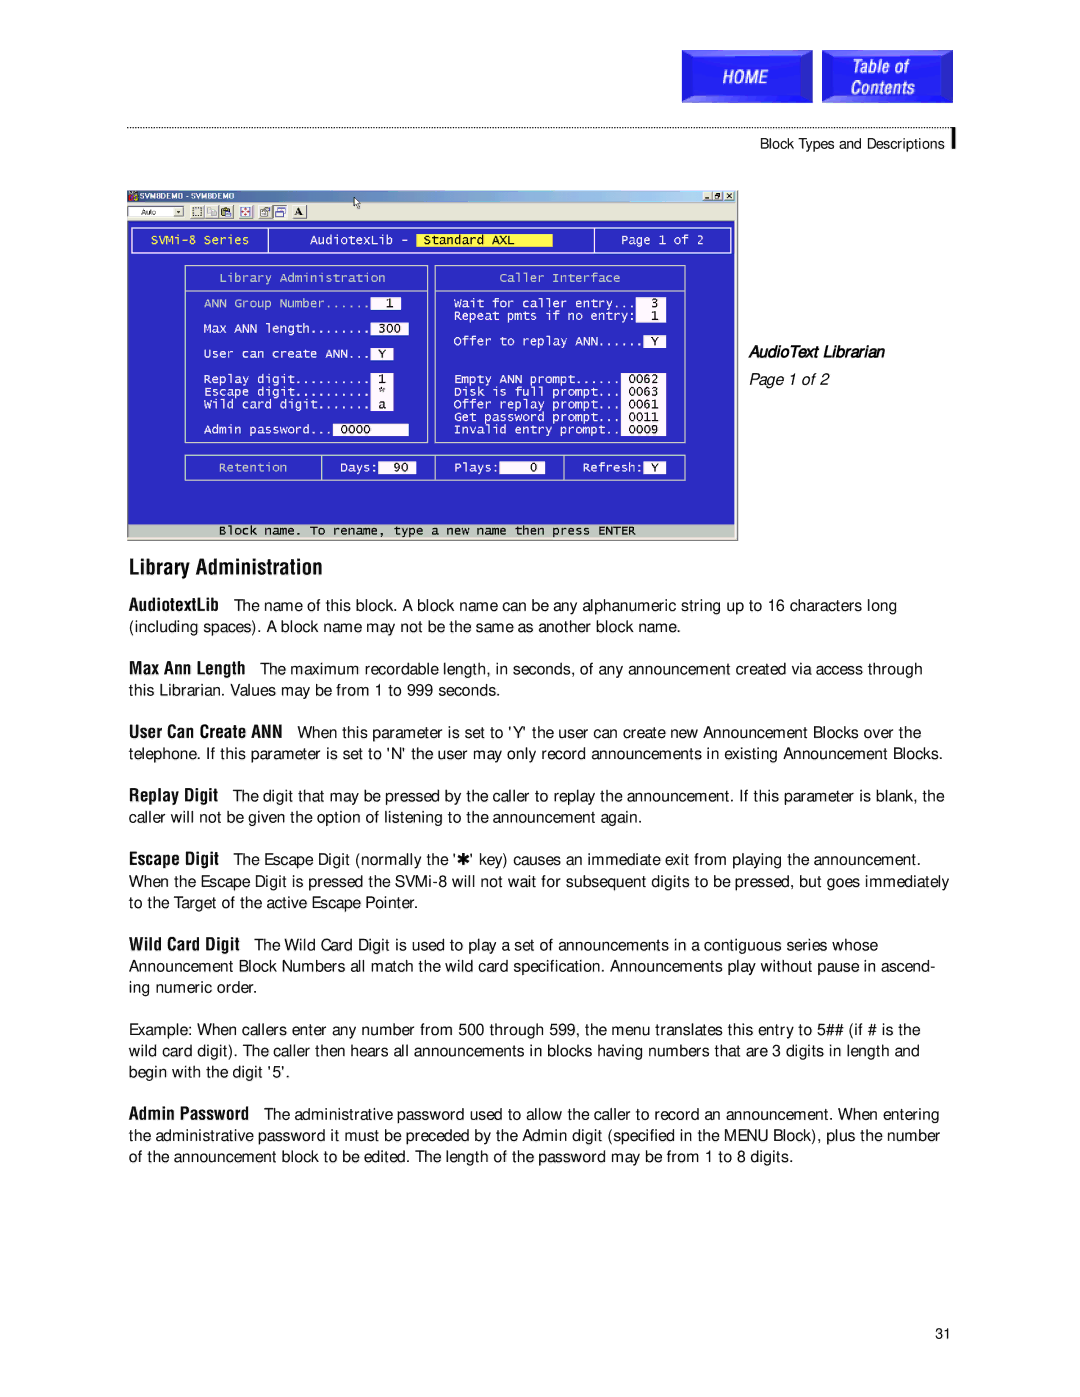 Samsung SVMi-8 technical manual Library Administration, AudioText Librarian 